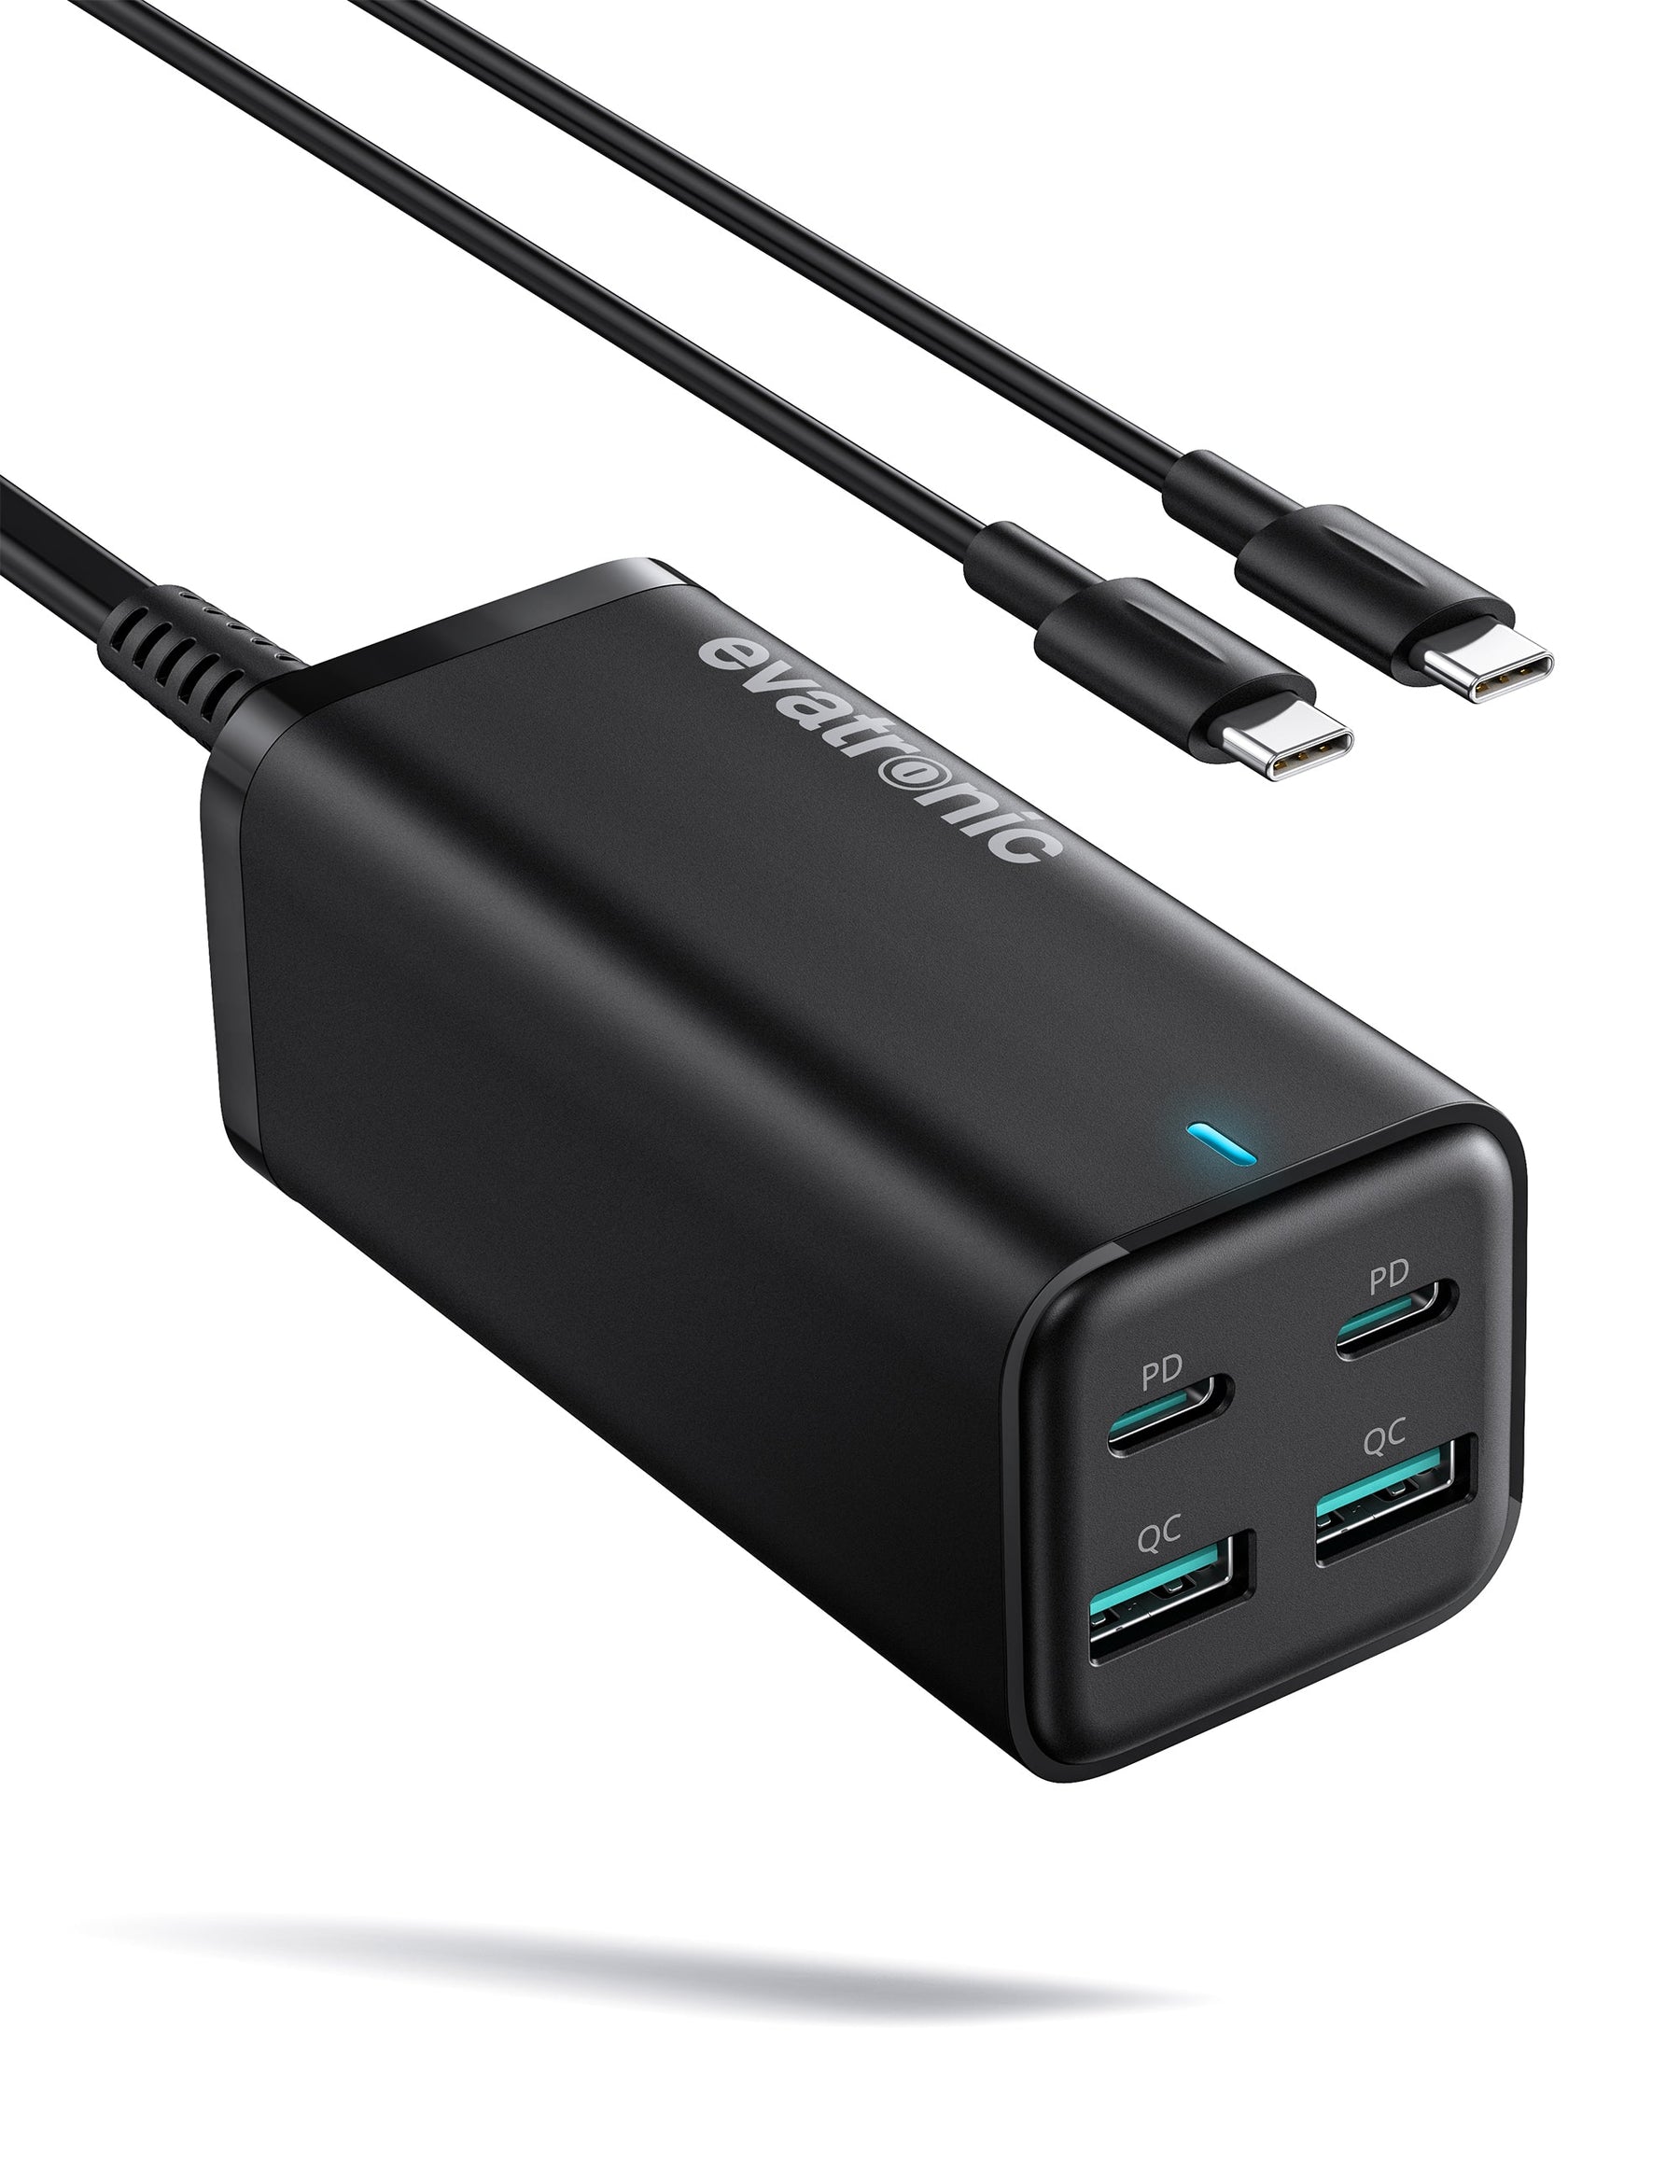 USB C Charger, Evatronic 100W 2 USB-C Ports PD Wall Charging Adapter